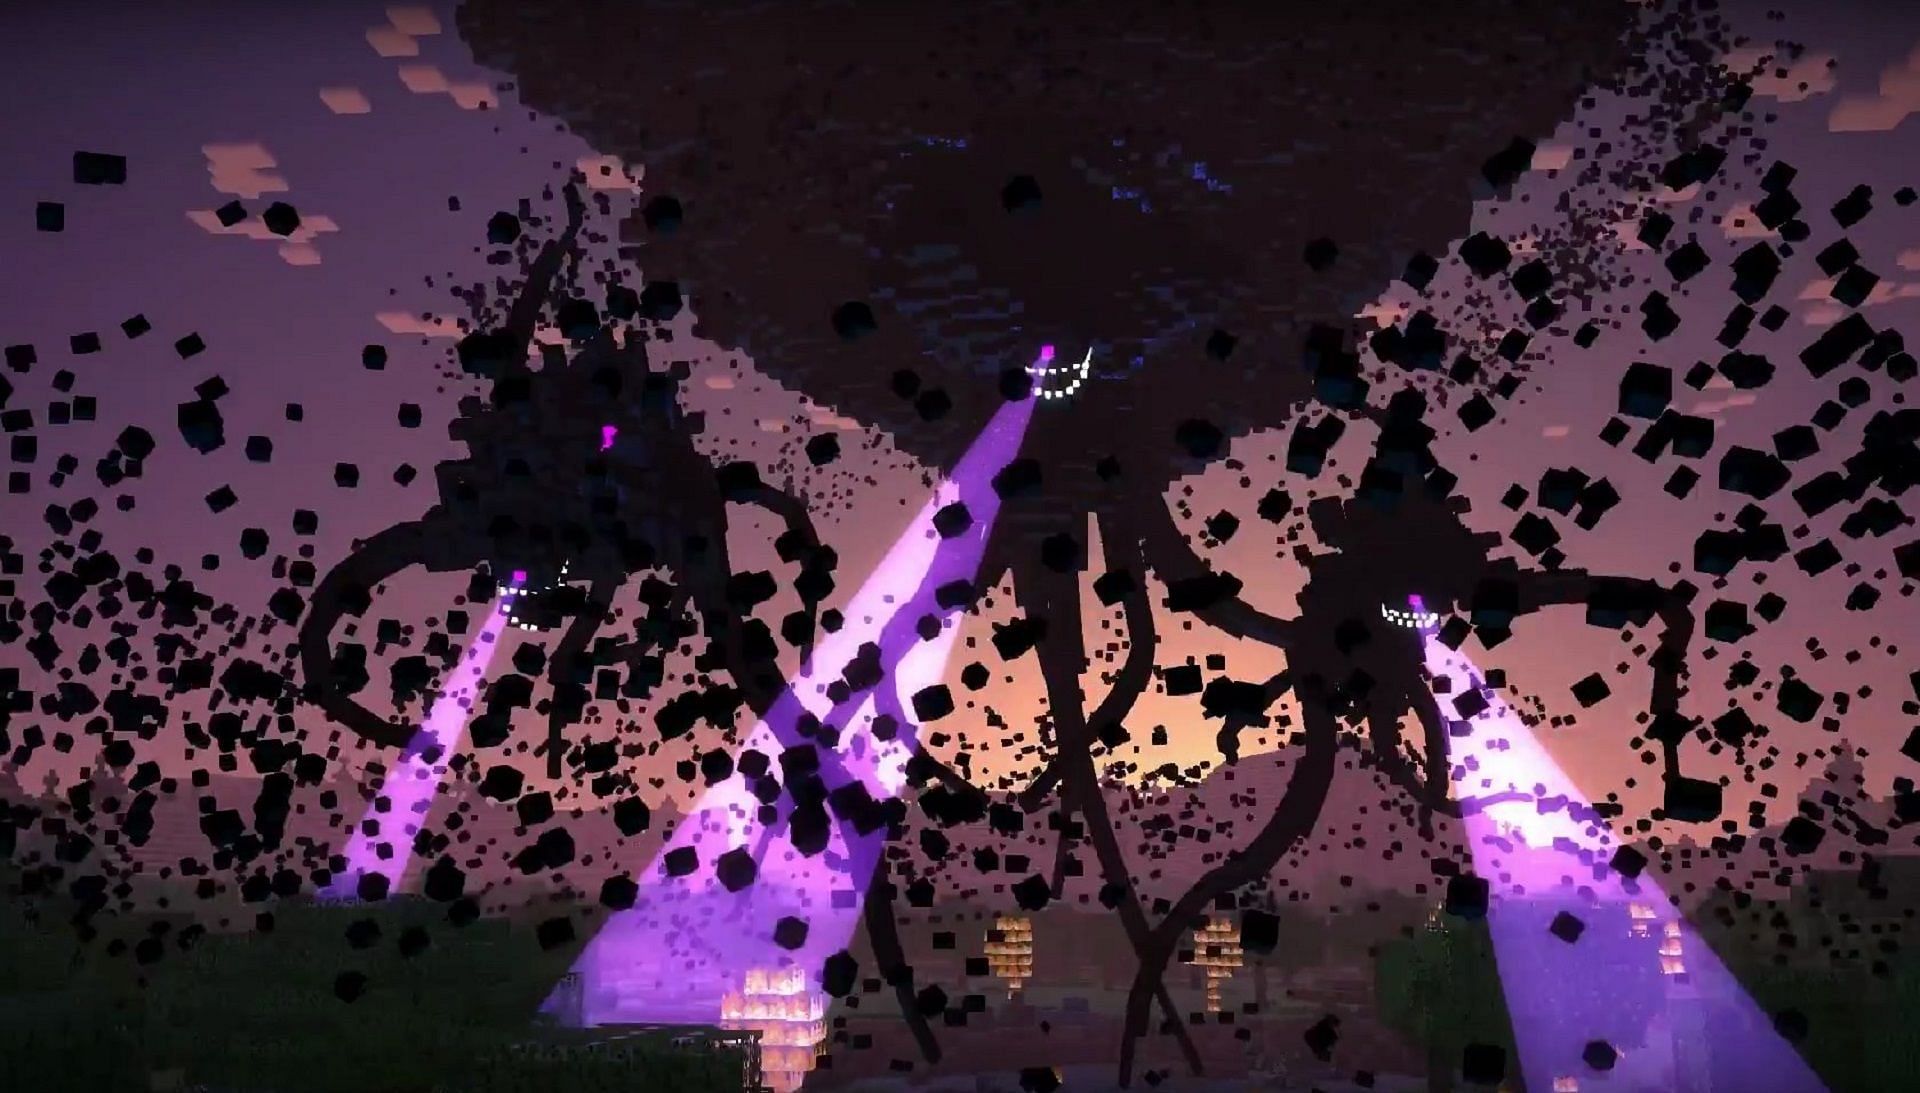 The Wither Storm in Minecraft: Story Mode (Image via Mojang/Telltale Games)